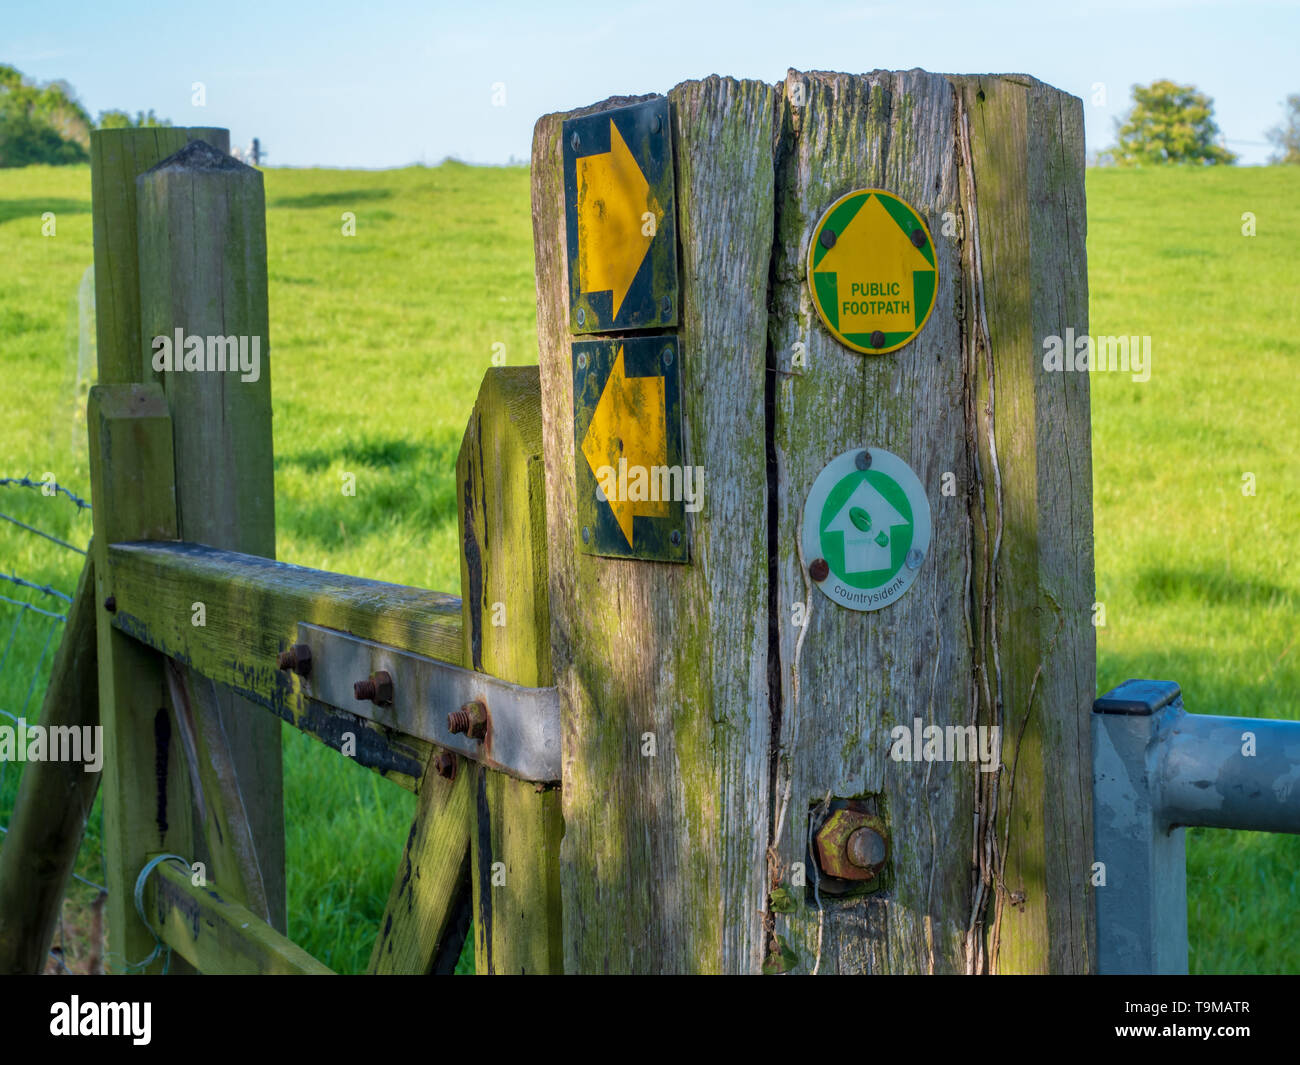 Footpath signs, markers and pointer on a rural walking route pointing multiple directions to guide walkers and hikers Stock Photo